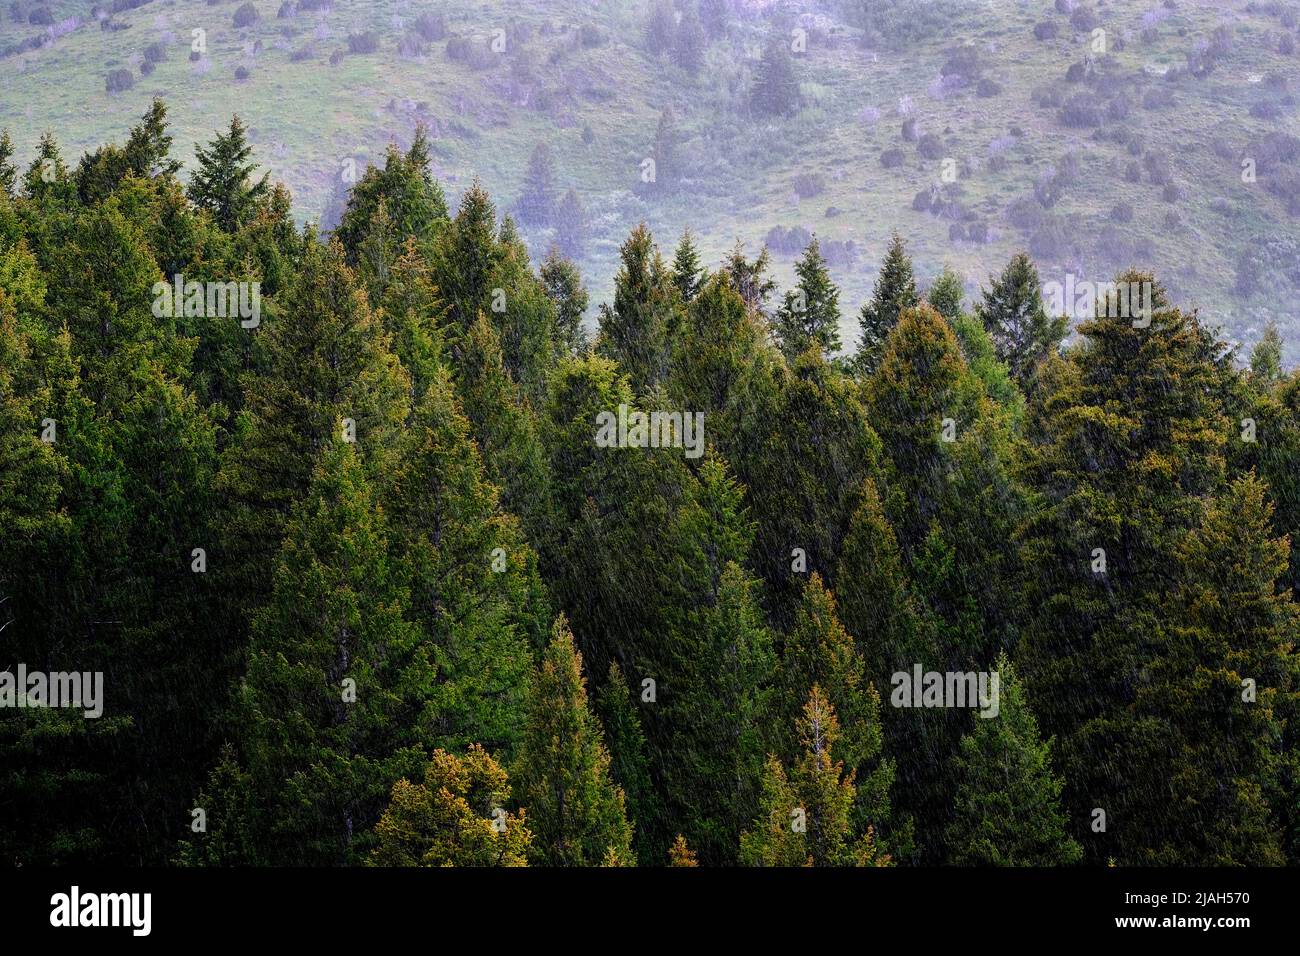 Forest Of Green Pine Trees On Mountainside With Late Afternoon